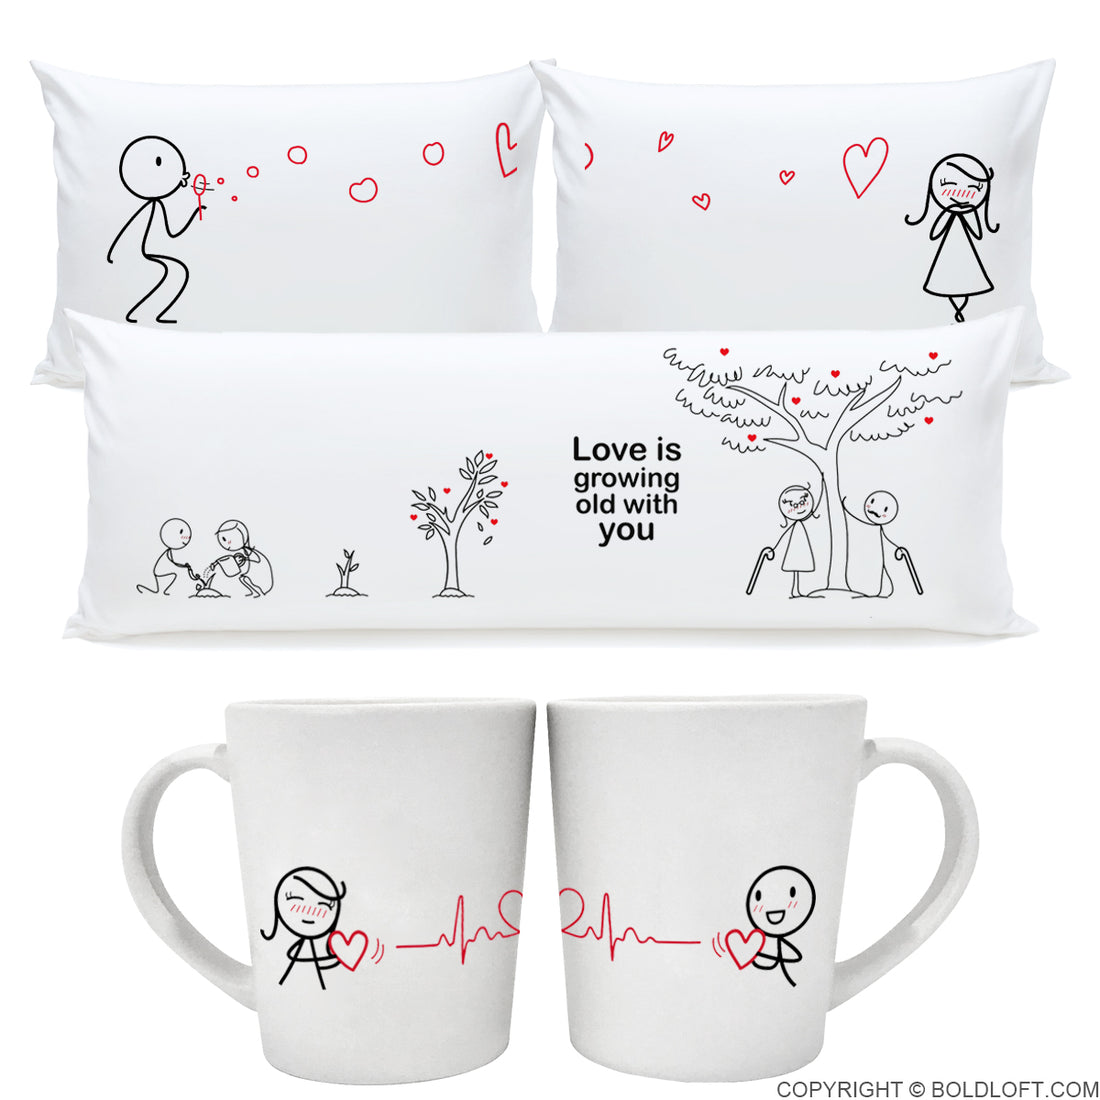 BOLDLOFT® Gifts for Couples - Couple Gifts - His & Hers Gifts